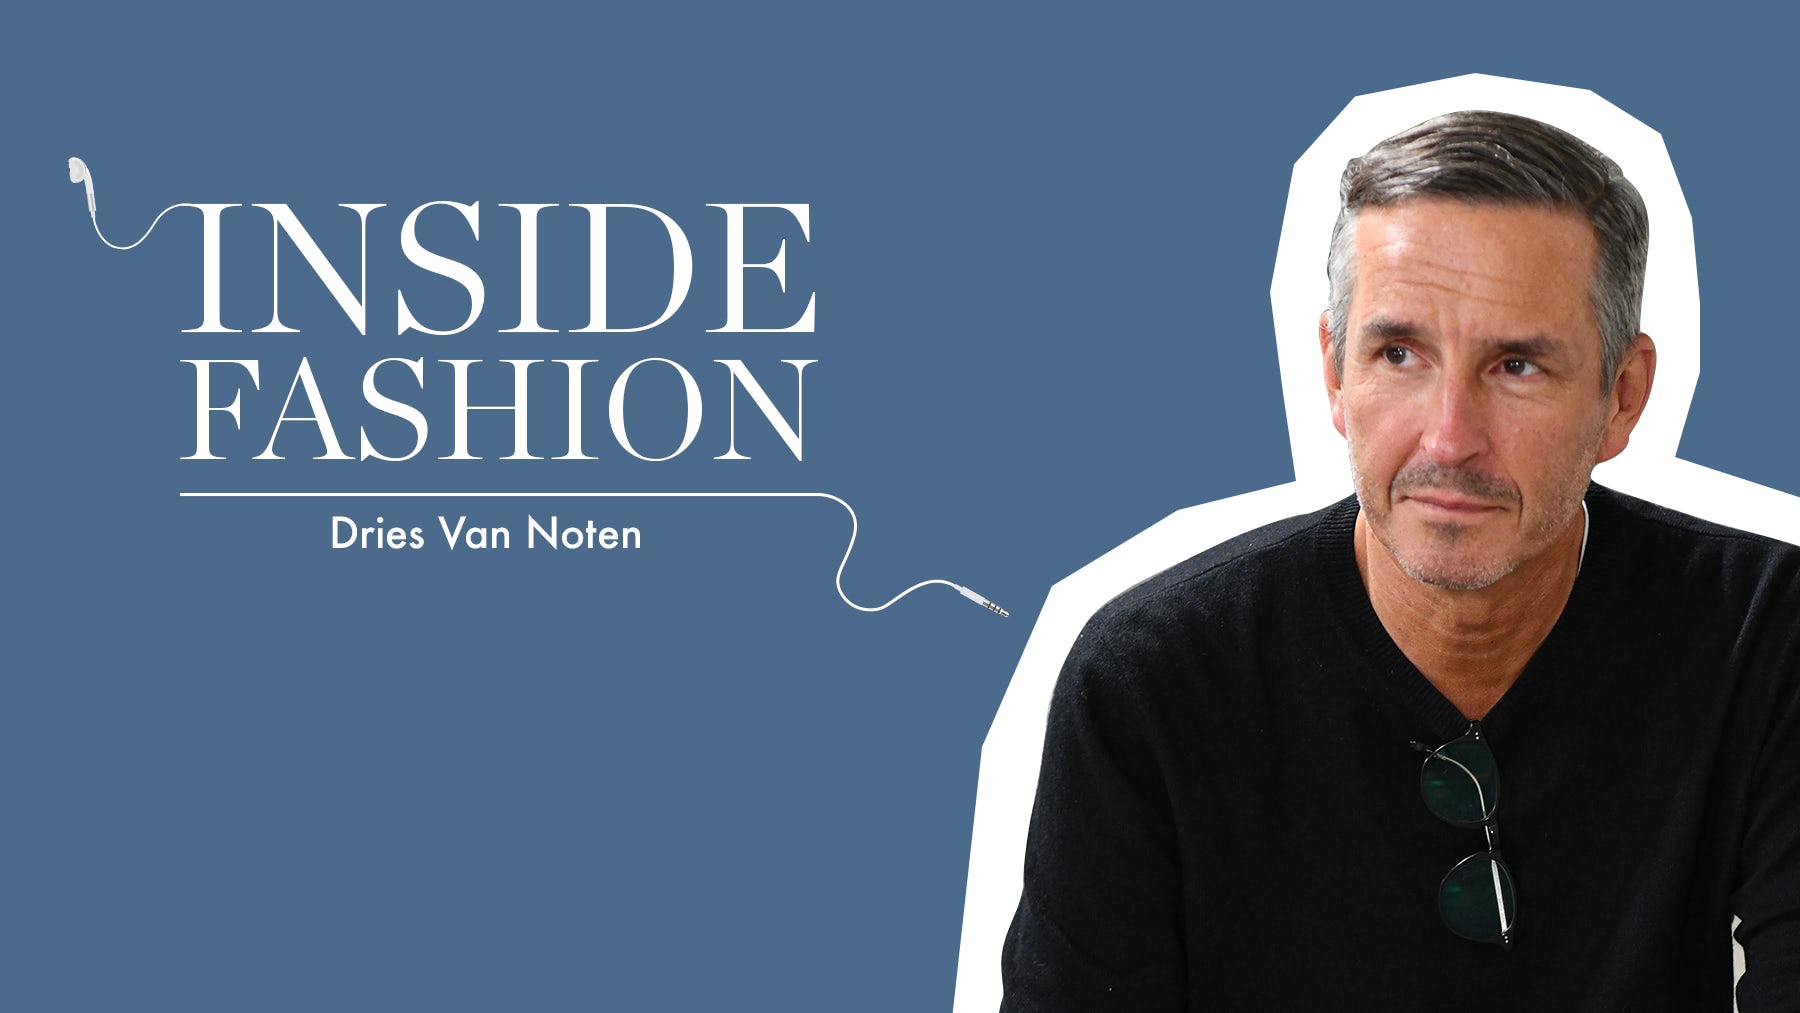 The BoF Podcast: Dries Van Noten on Making Retail Meaningful in